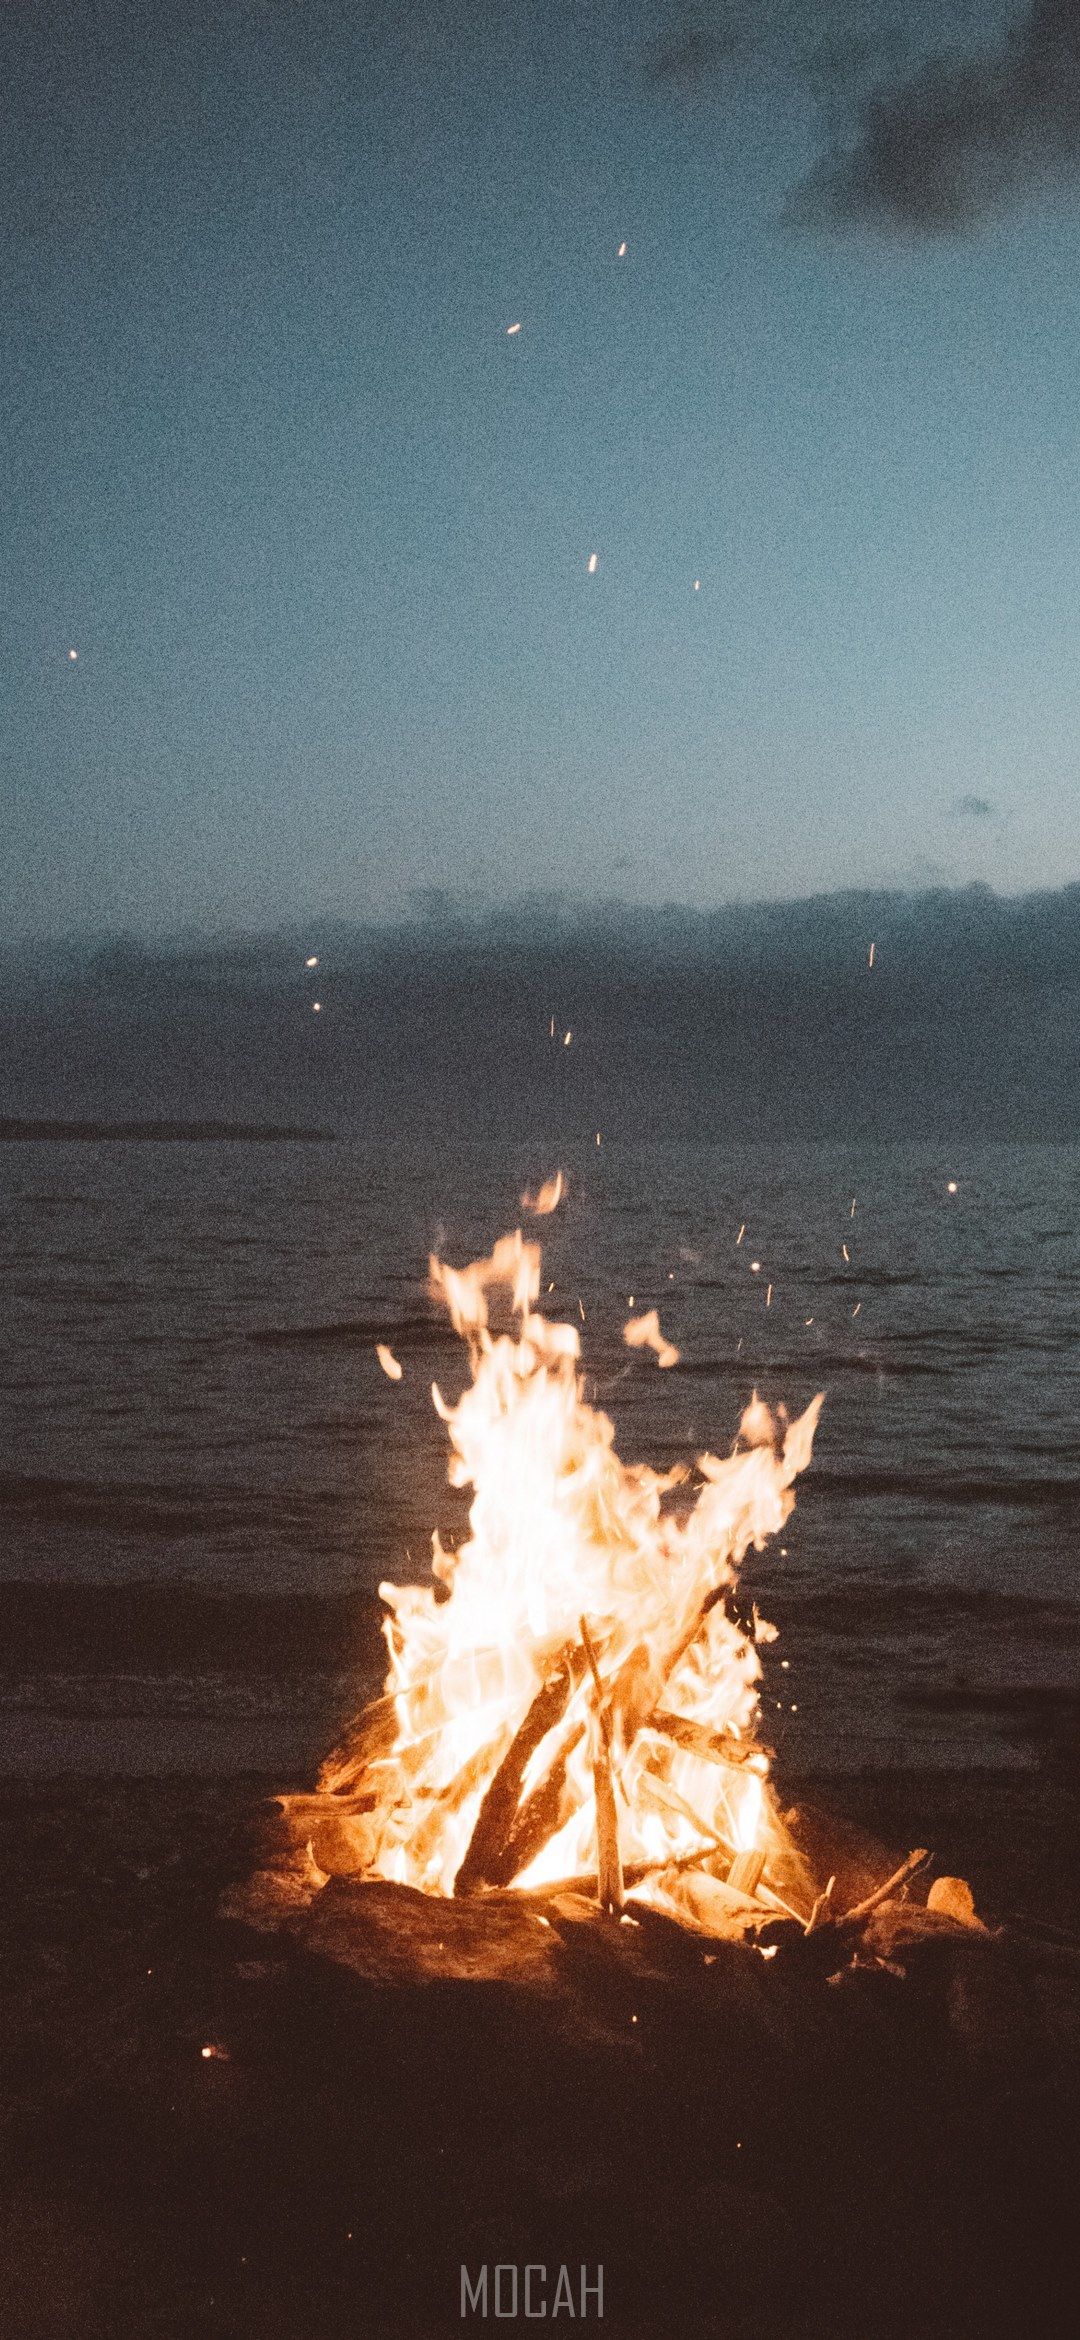 A bonfire burns on the beach with the ocean in the background - Camping